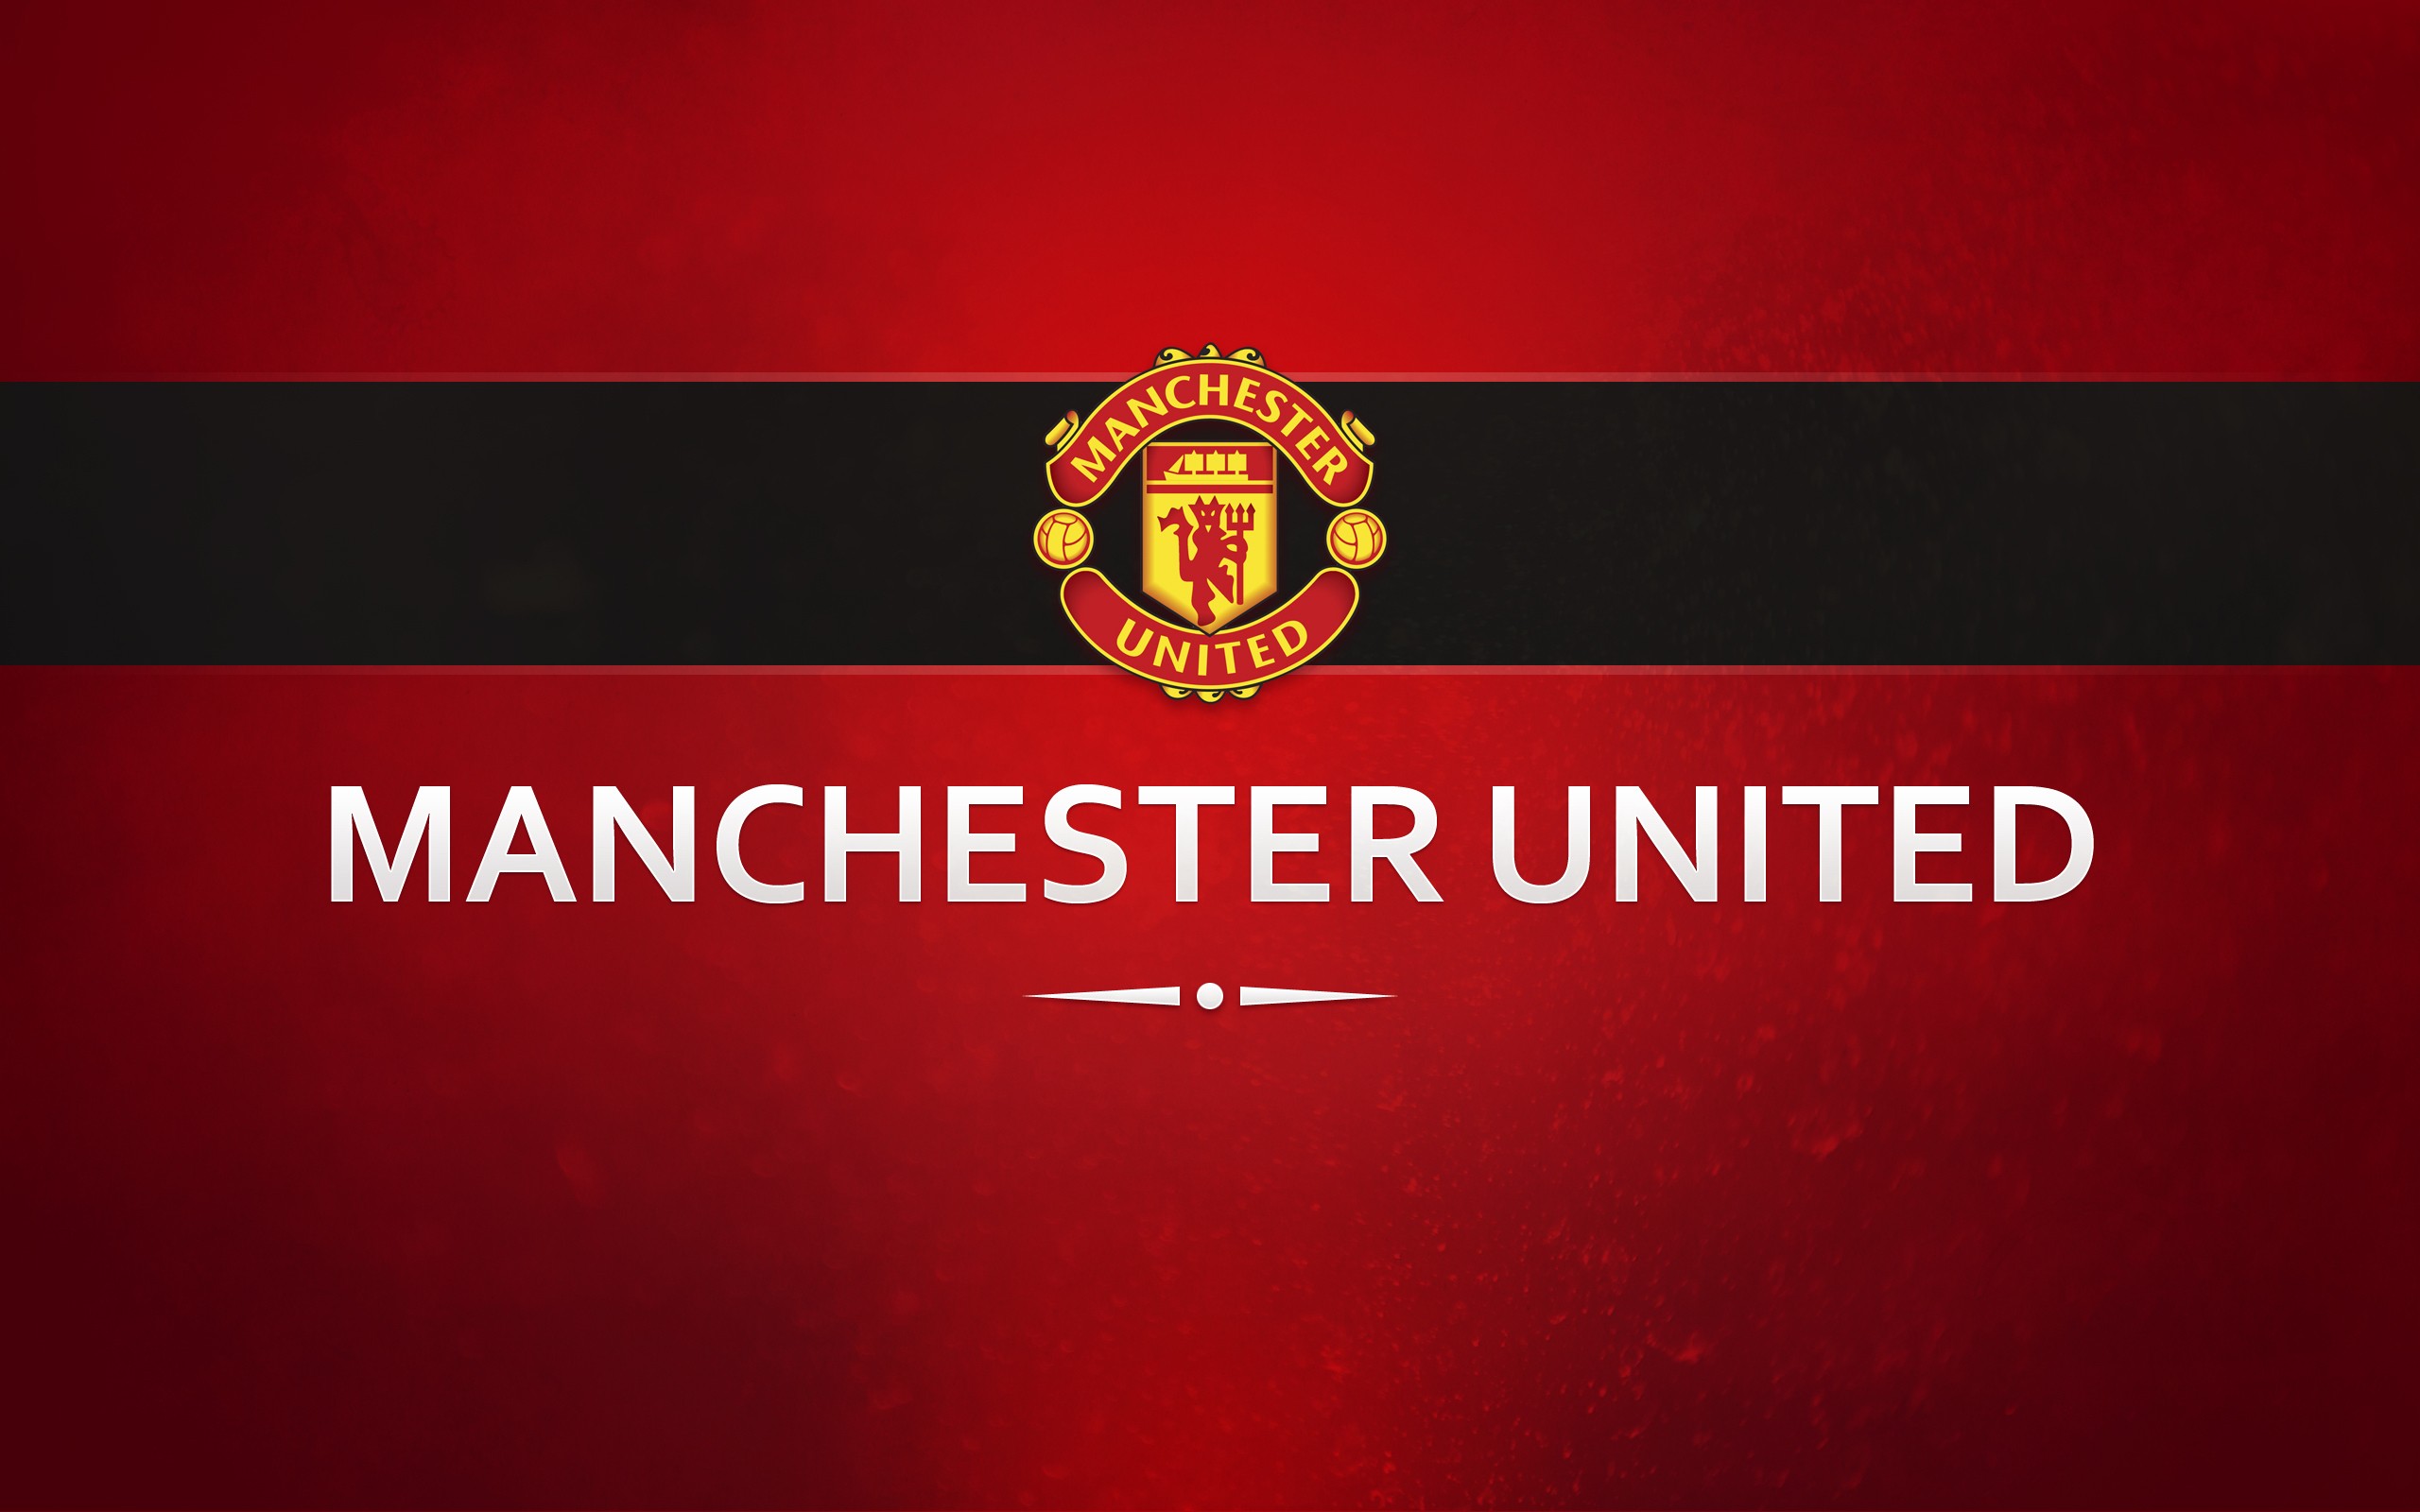 Manchester United Soccer Clubs Premier League Typography 2560x1600